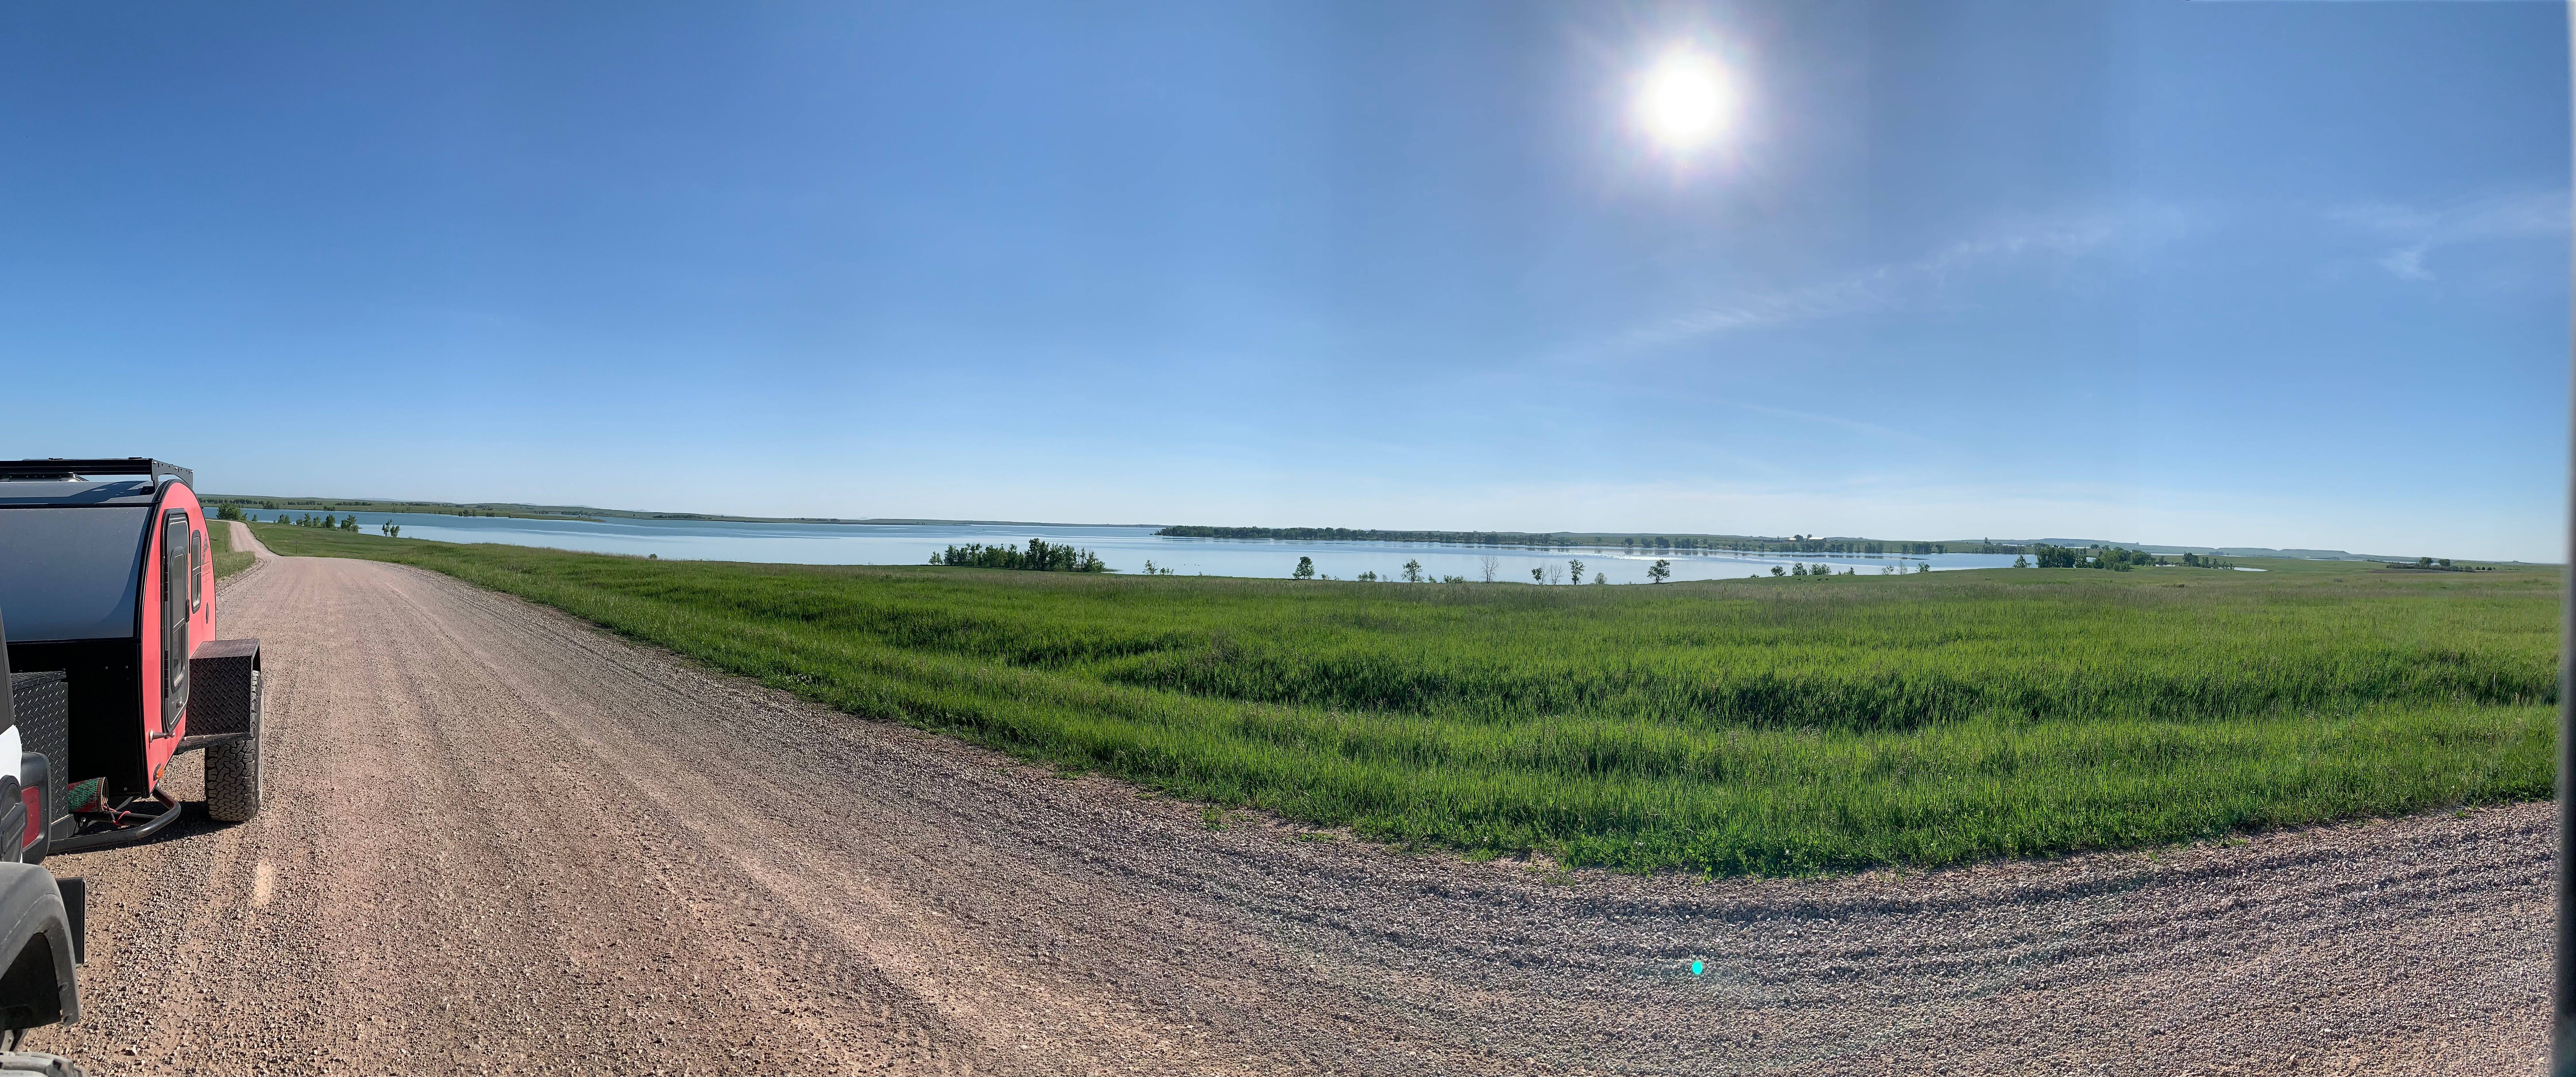 Camper submitted image from Belle Fourche Reservoir Dispersed Camping  - 4